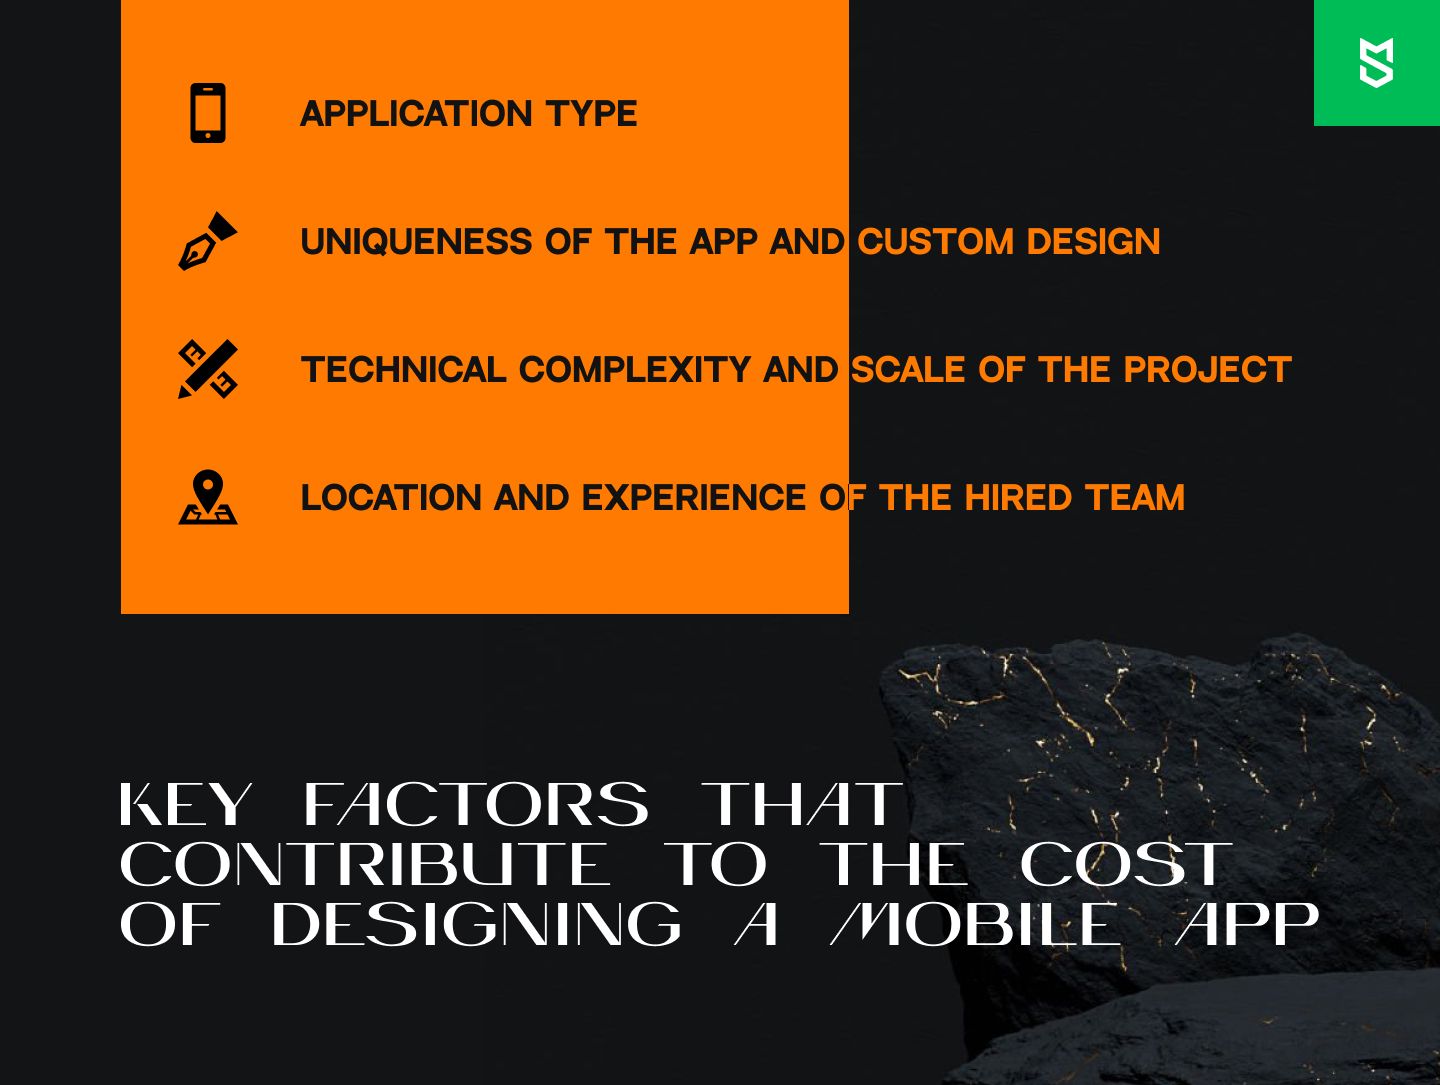 4 key factors that contribute to the cost of designing a mobile app